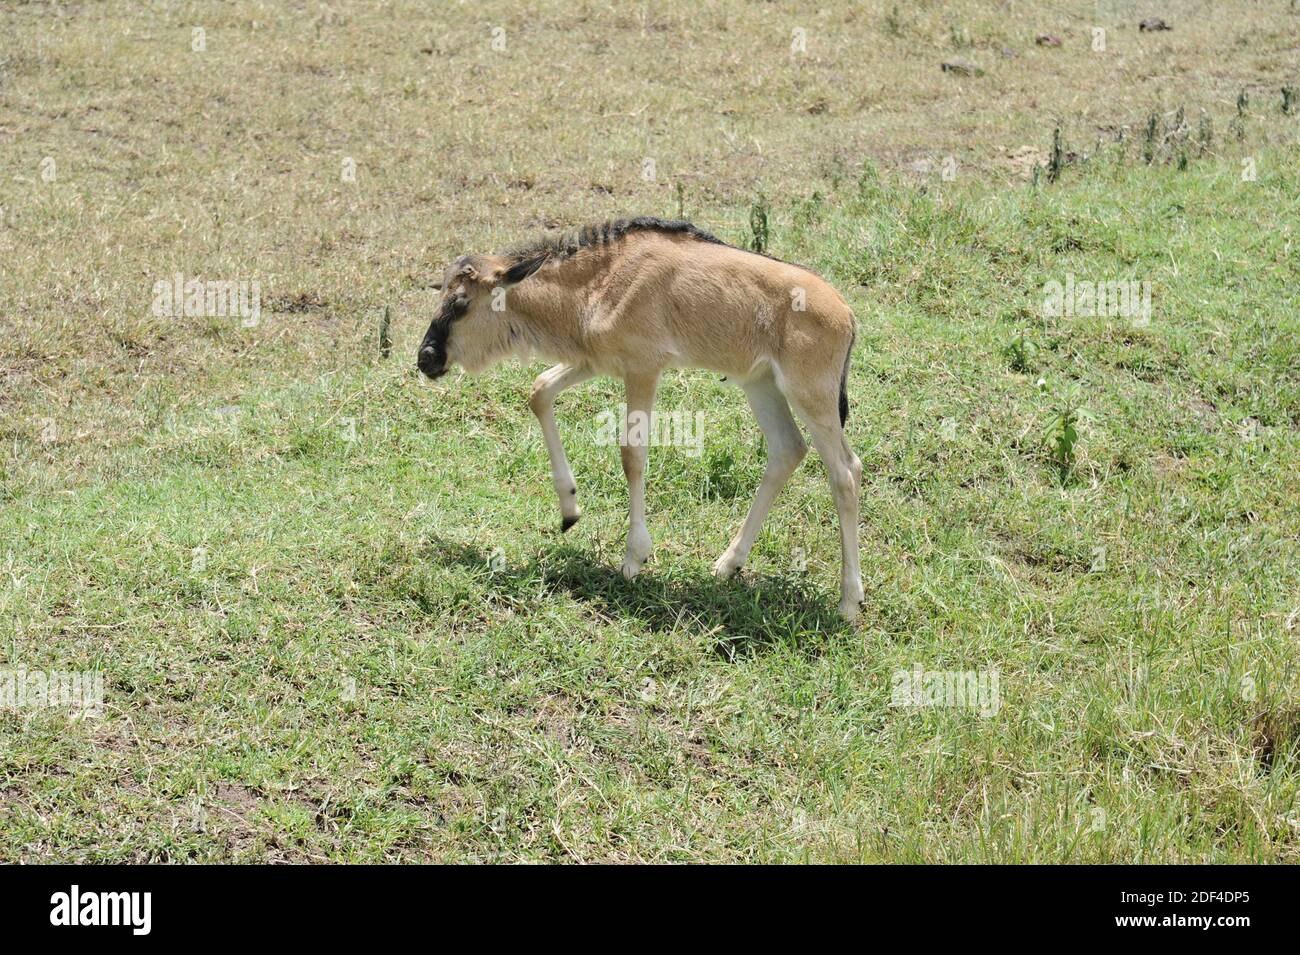 A baby wildebeest walking in the Ngorongoro Crater, Tanzania, Africa. Stock Photo